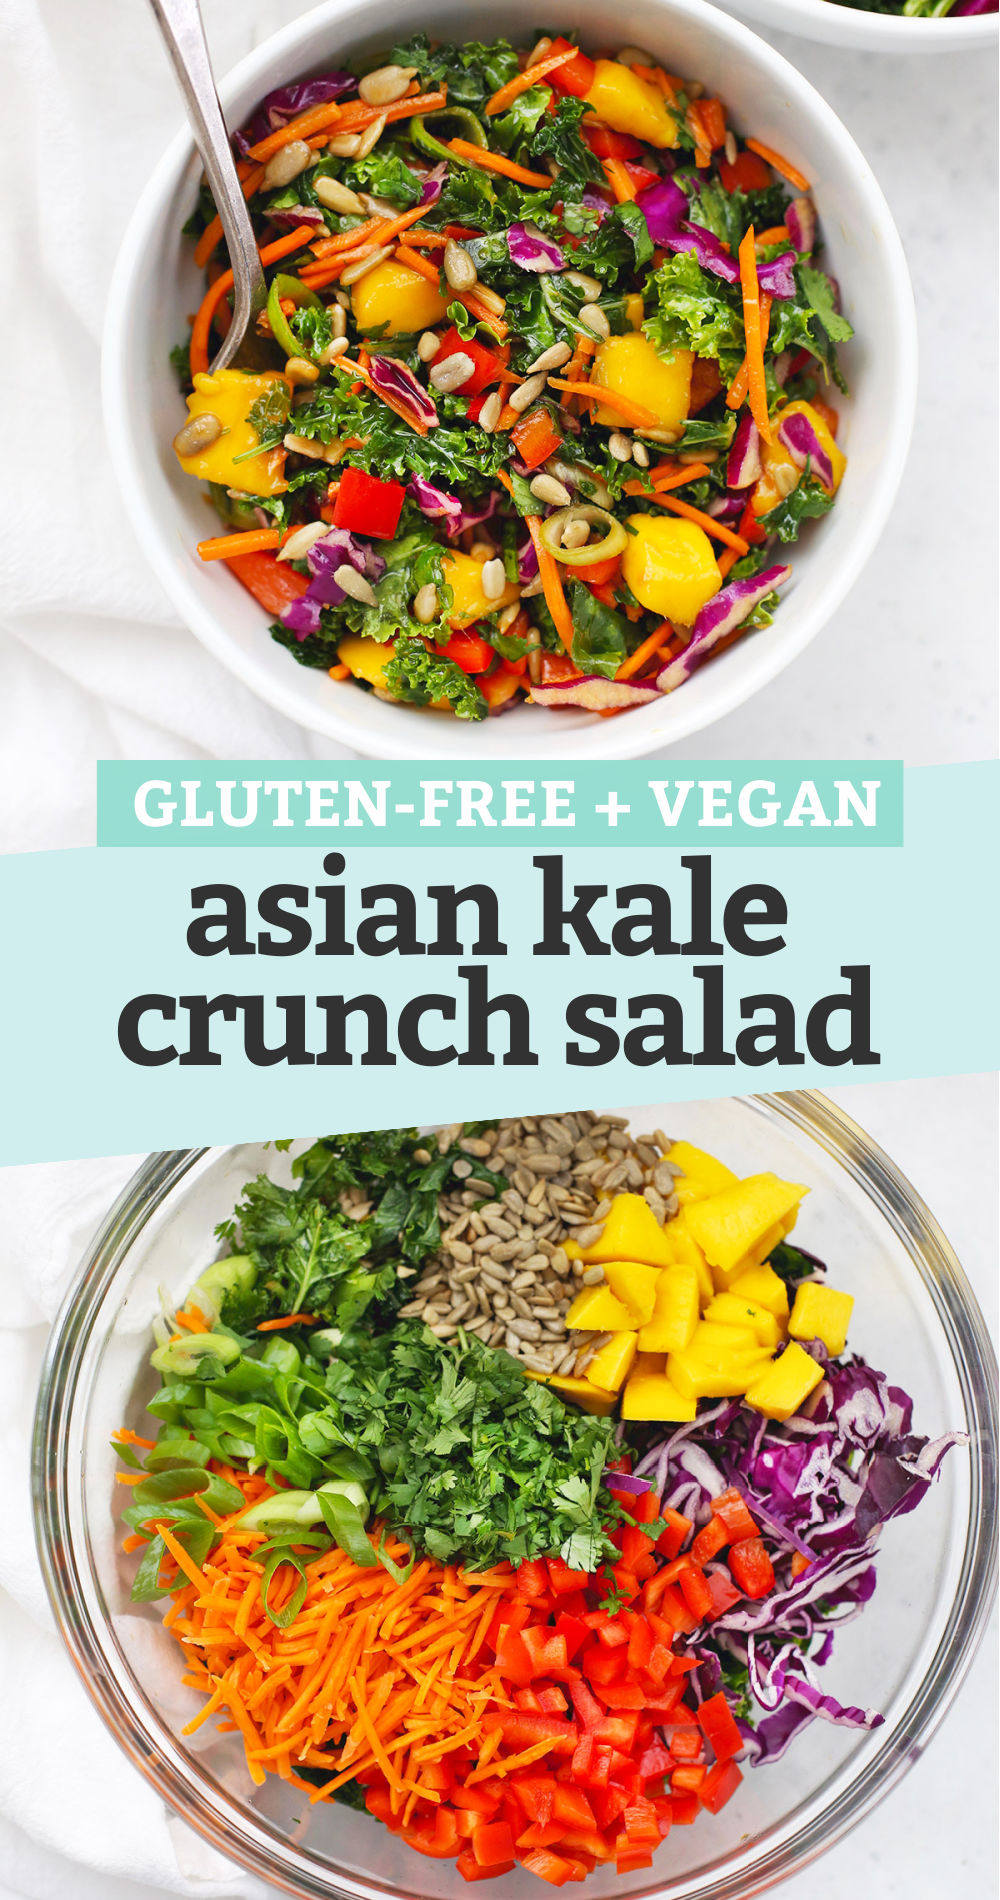 Collage of images of Asian Kale Crunch Salad with text overlay that reads "Gluten-free + Vegan Asian Kale Crunch Salad"